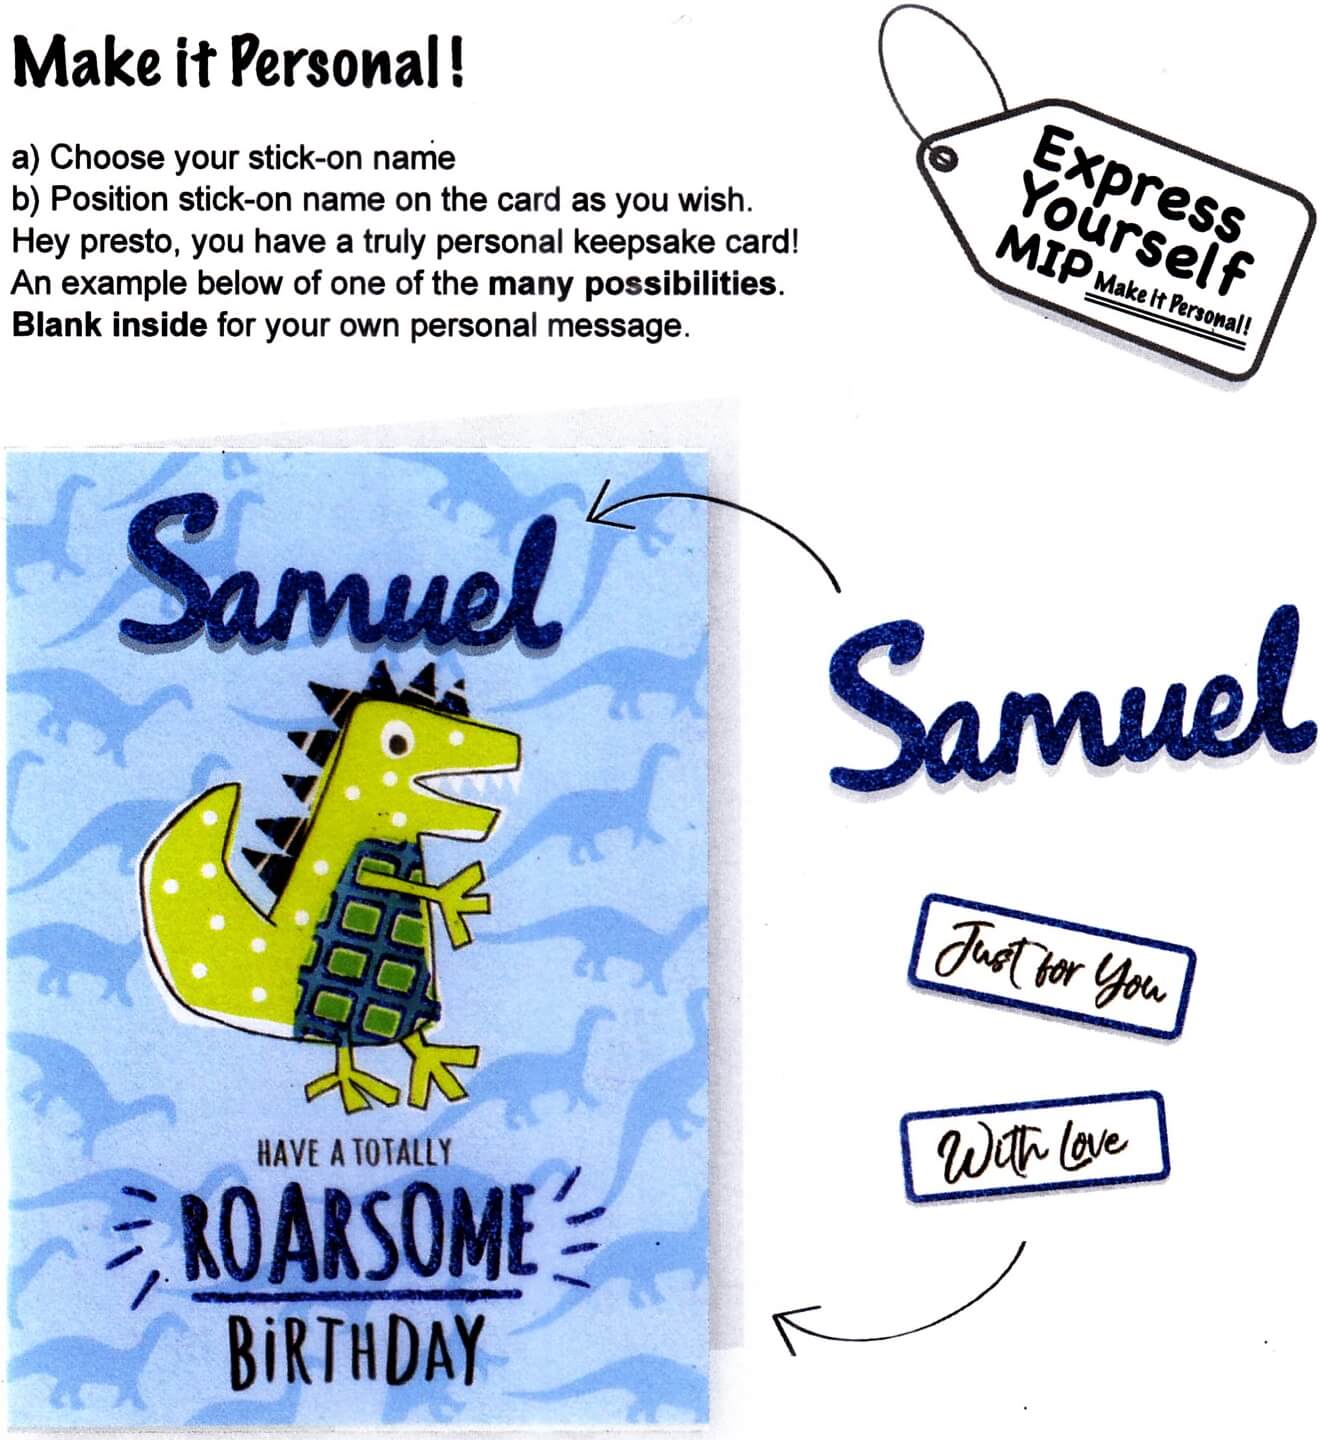 Greeting card for a person named Samuel